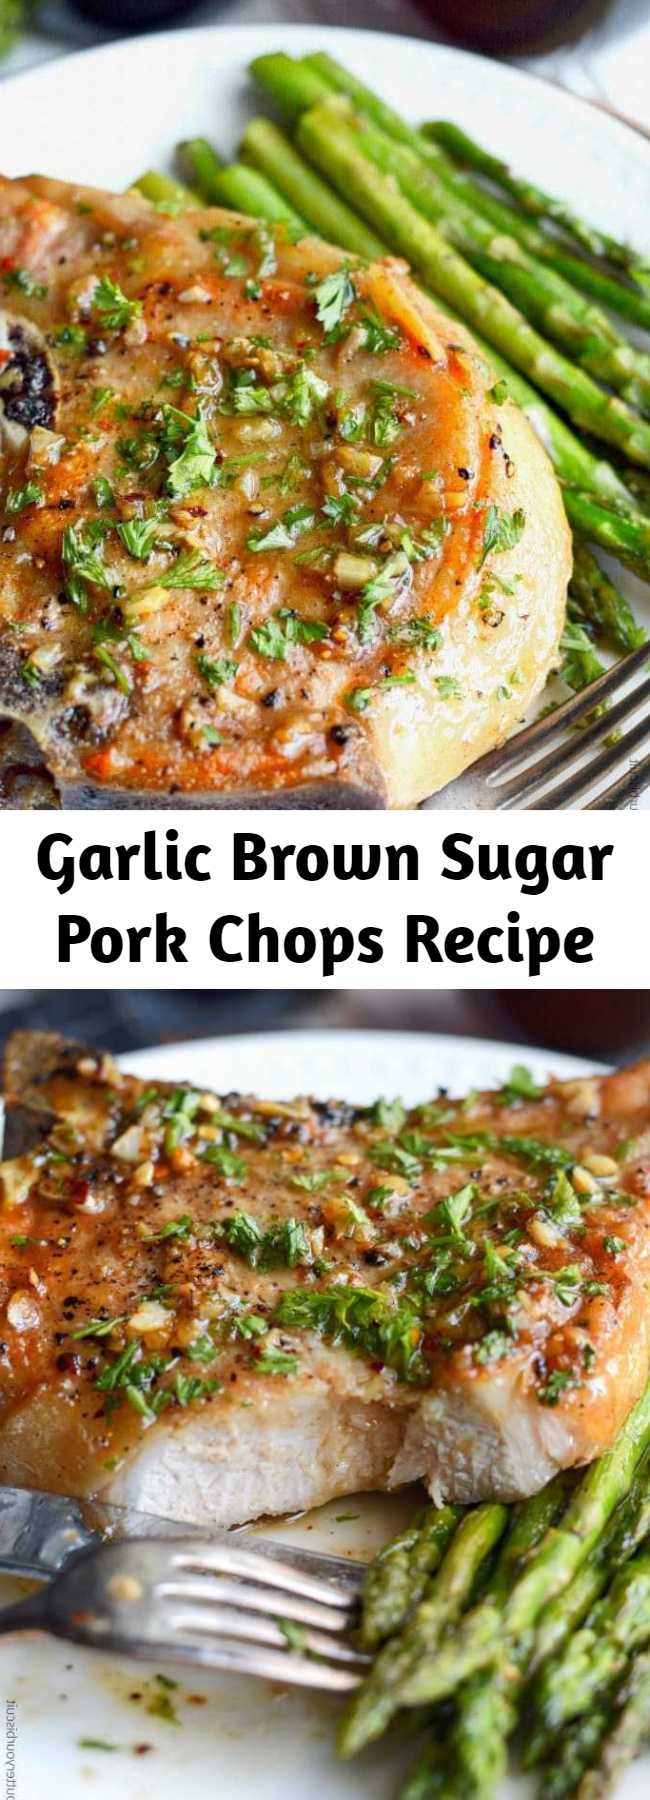 Garlic Brown Sugar Pork Chops Recipe - These Garlic Brown Sugar Pork Chops are such a delicious blend of flavors, and is sure to be a new family favorite!